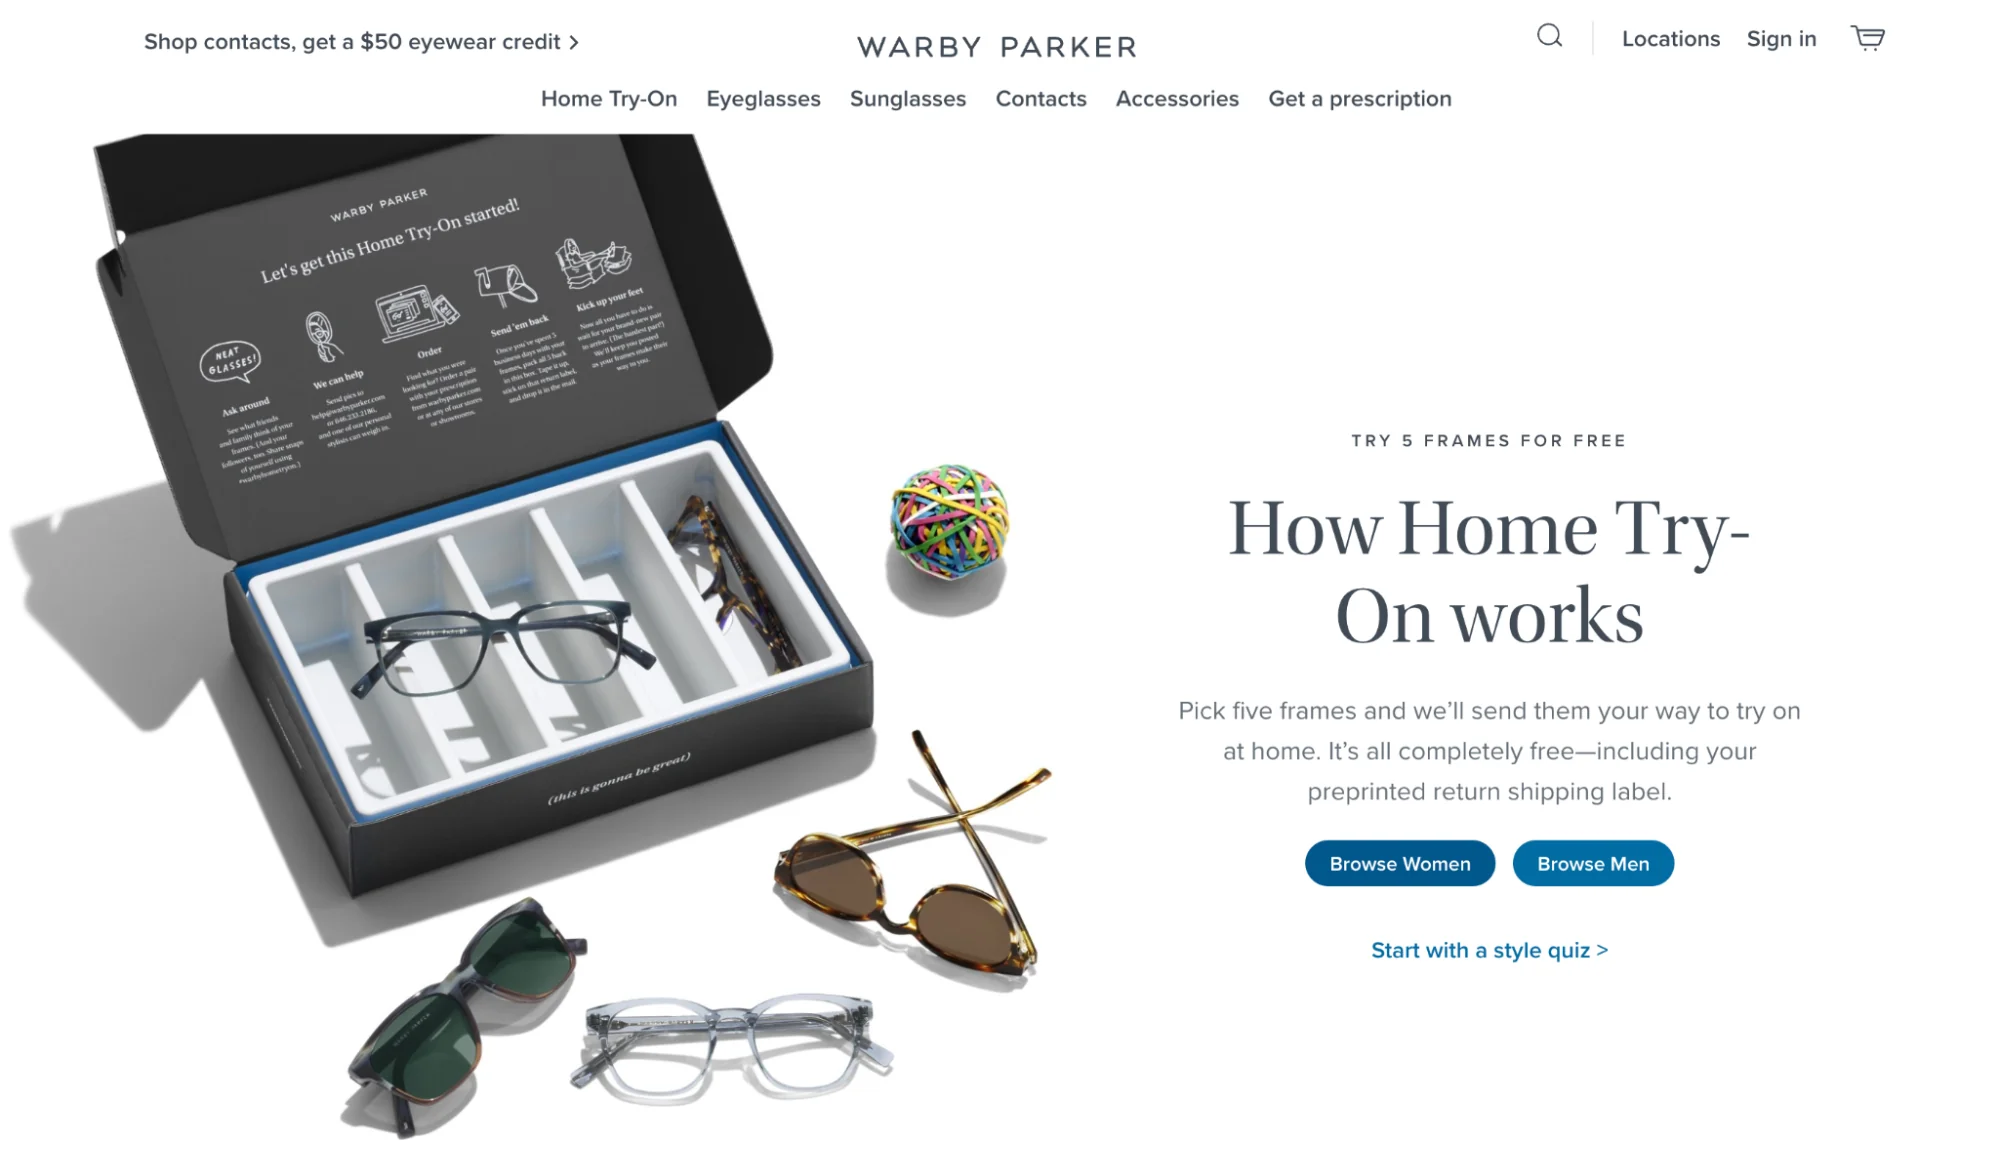 Screenshot of Warby Parker landing page for How Home Try-On works